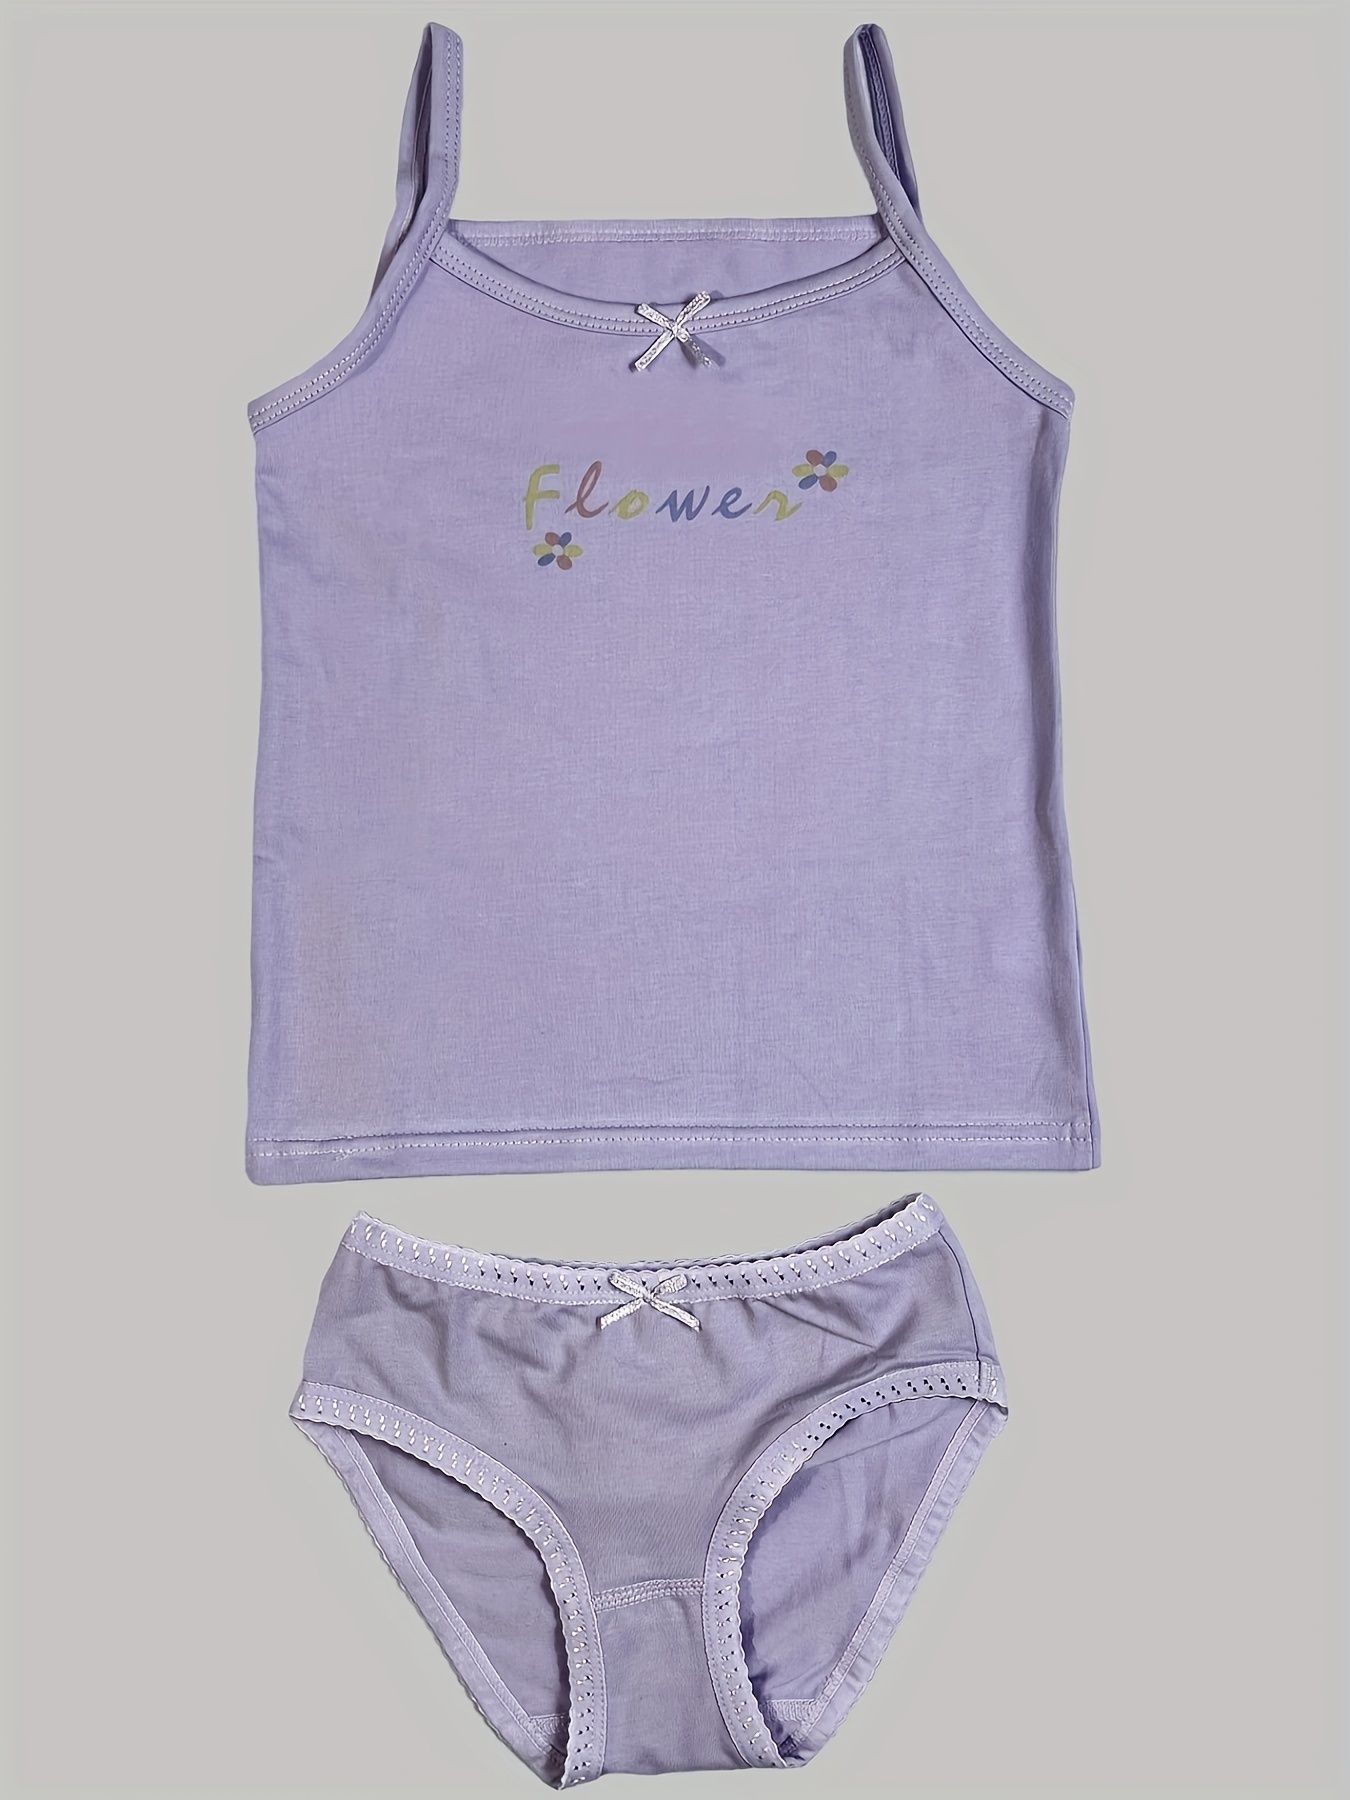 Second Life Marketplace - .:BABYLUSH:. 3 Pack Camisole & Panties - for  BadSeed Bebe Body - Purple